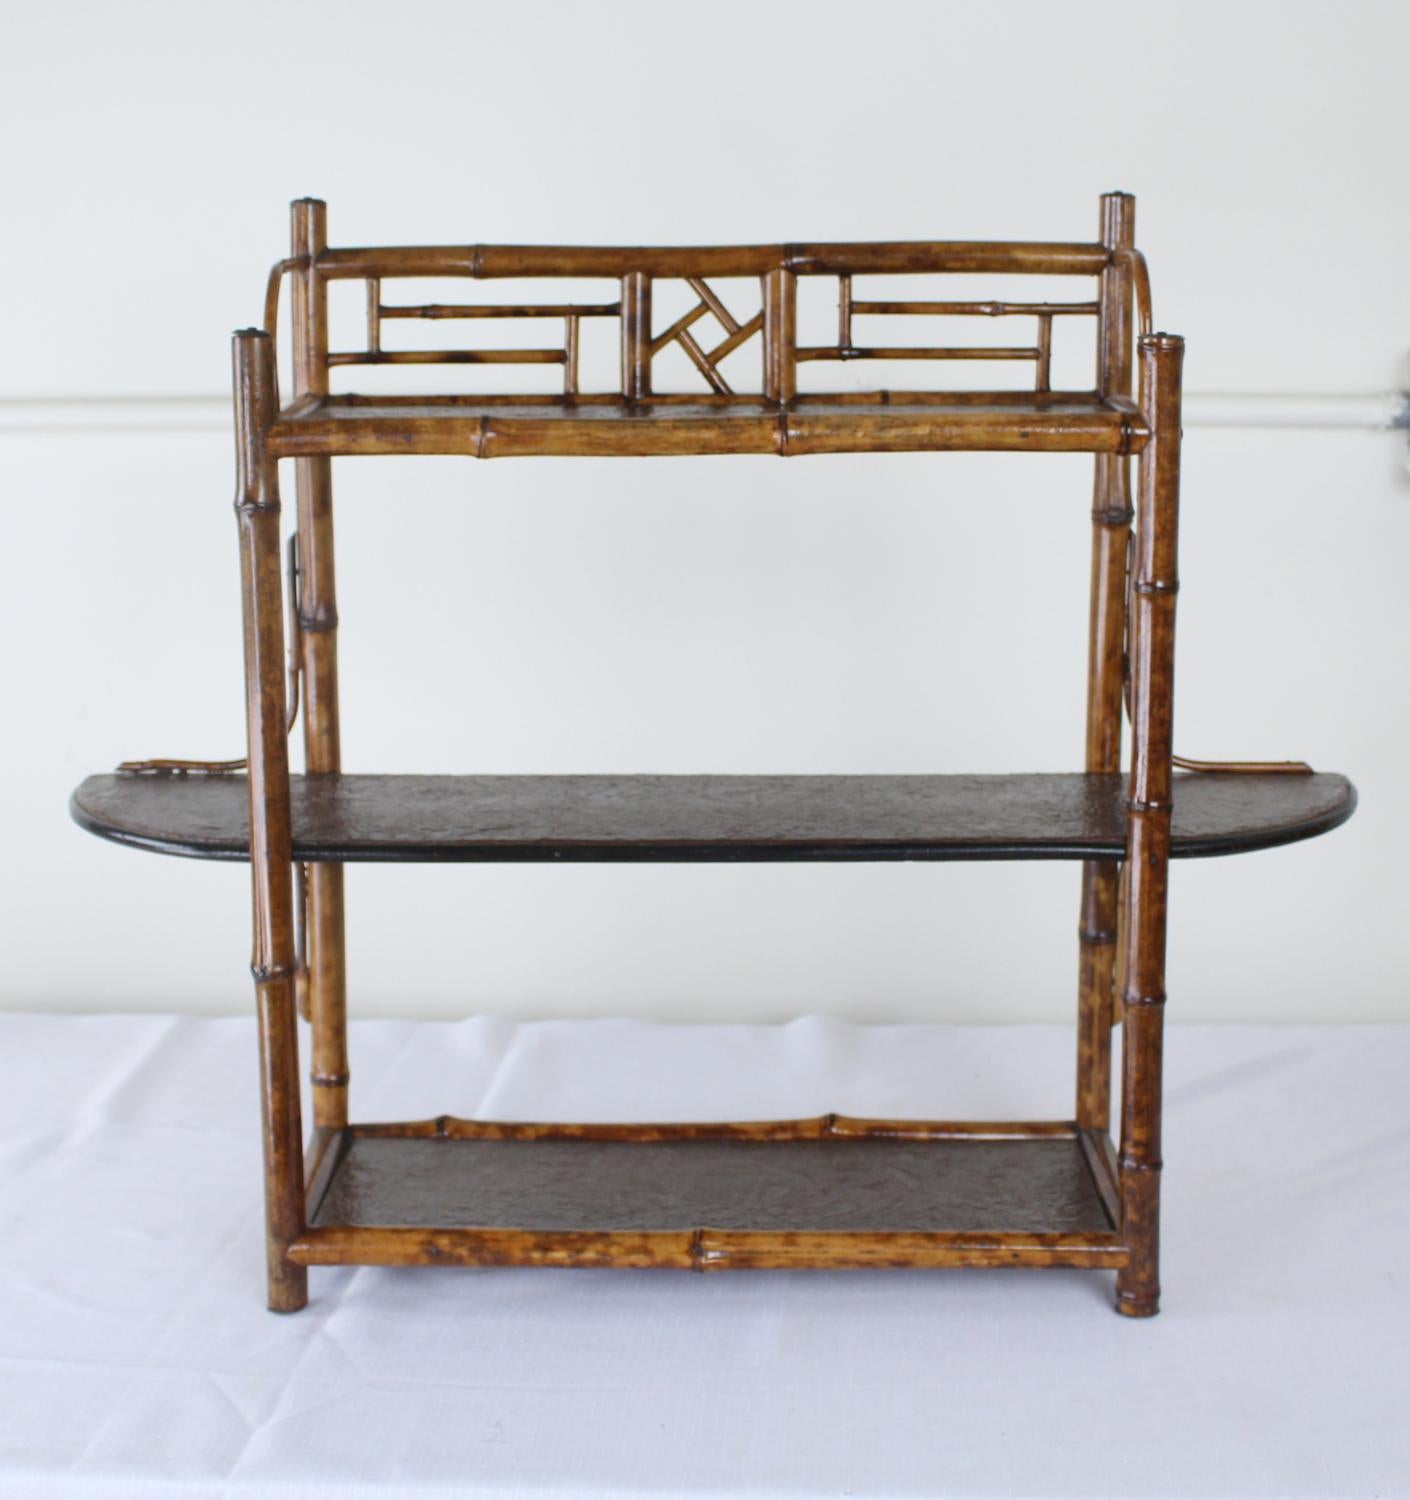 A charming wall or free standing shelf, fashioned of vibrant bamboo. The small detail pieces are all intact, and the pressed leather on the shelves is in good condition.